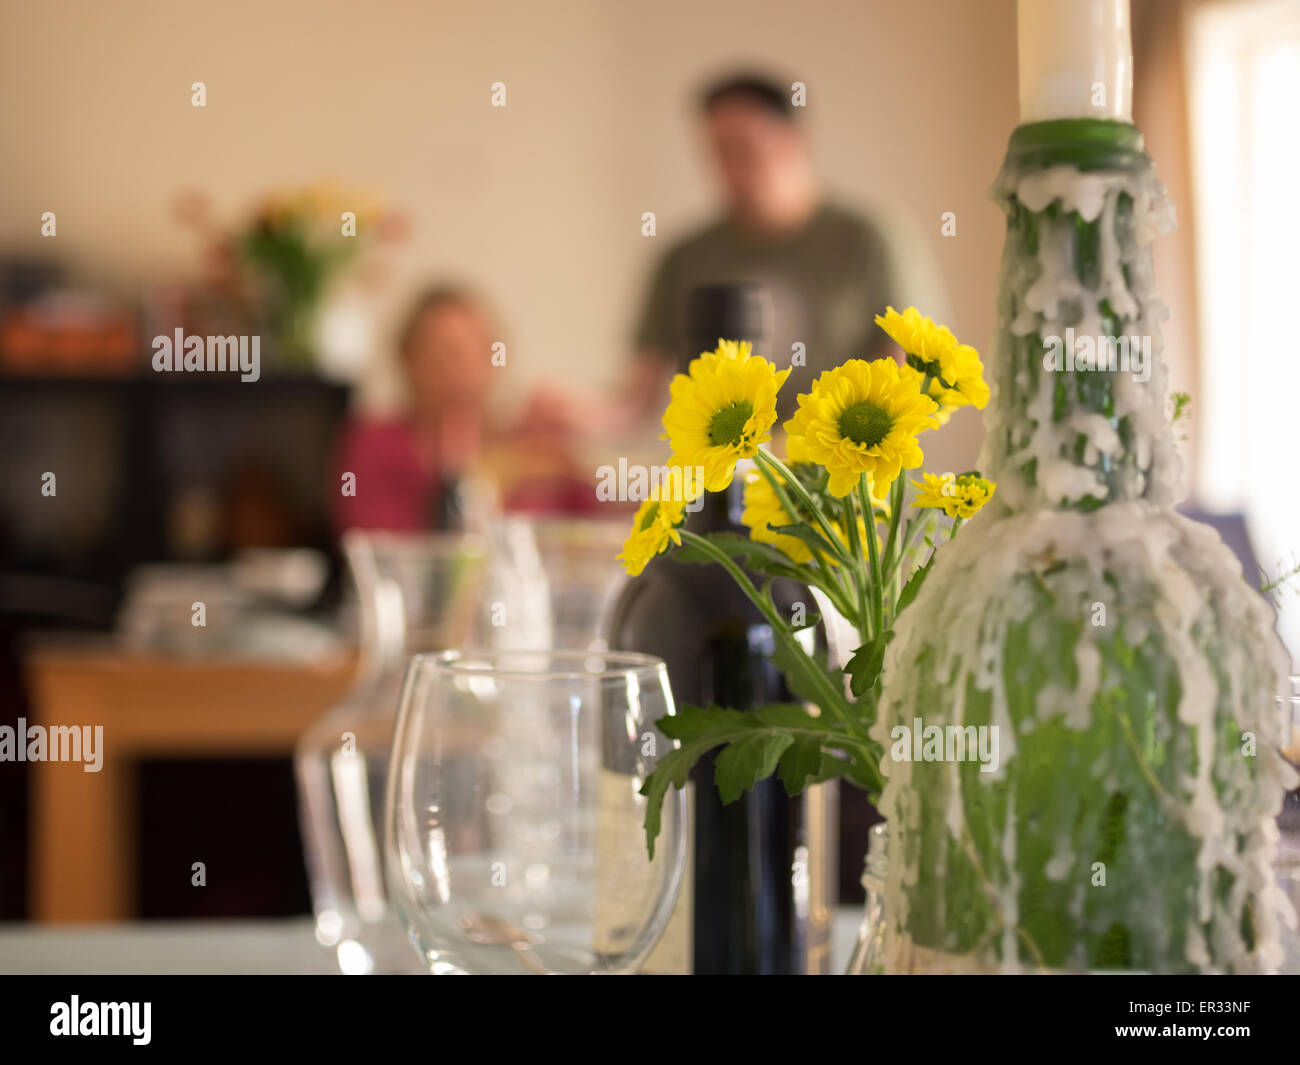 Two people preparing for supper club dinner party. Candle wax encrusted bottles, wine glasses and yellow flowers in foreground. Stock Photo